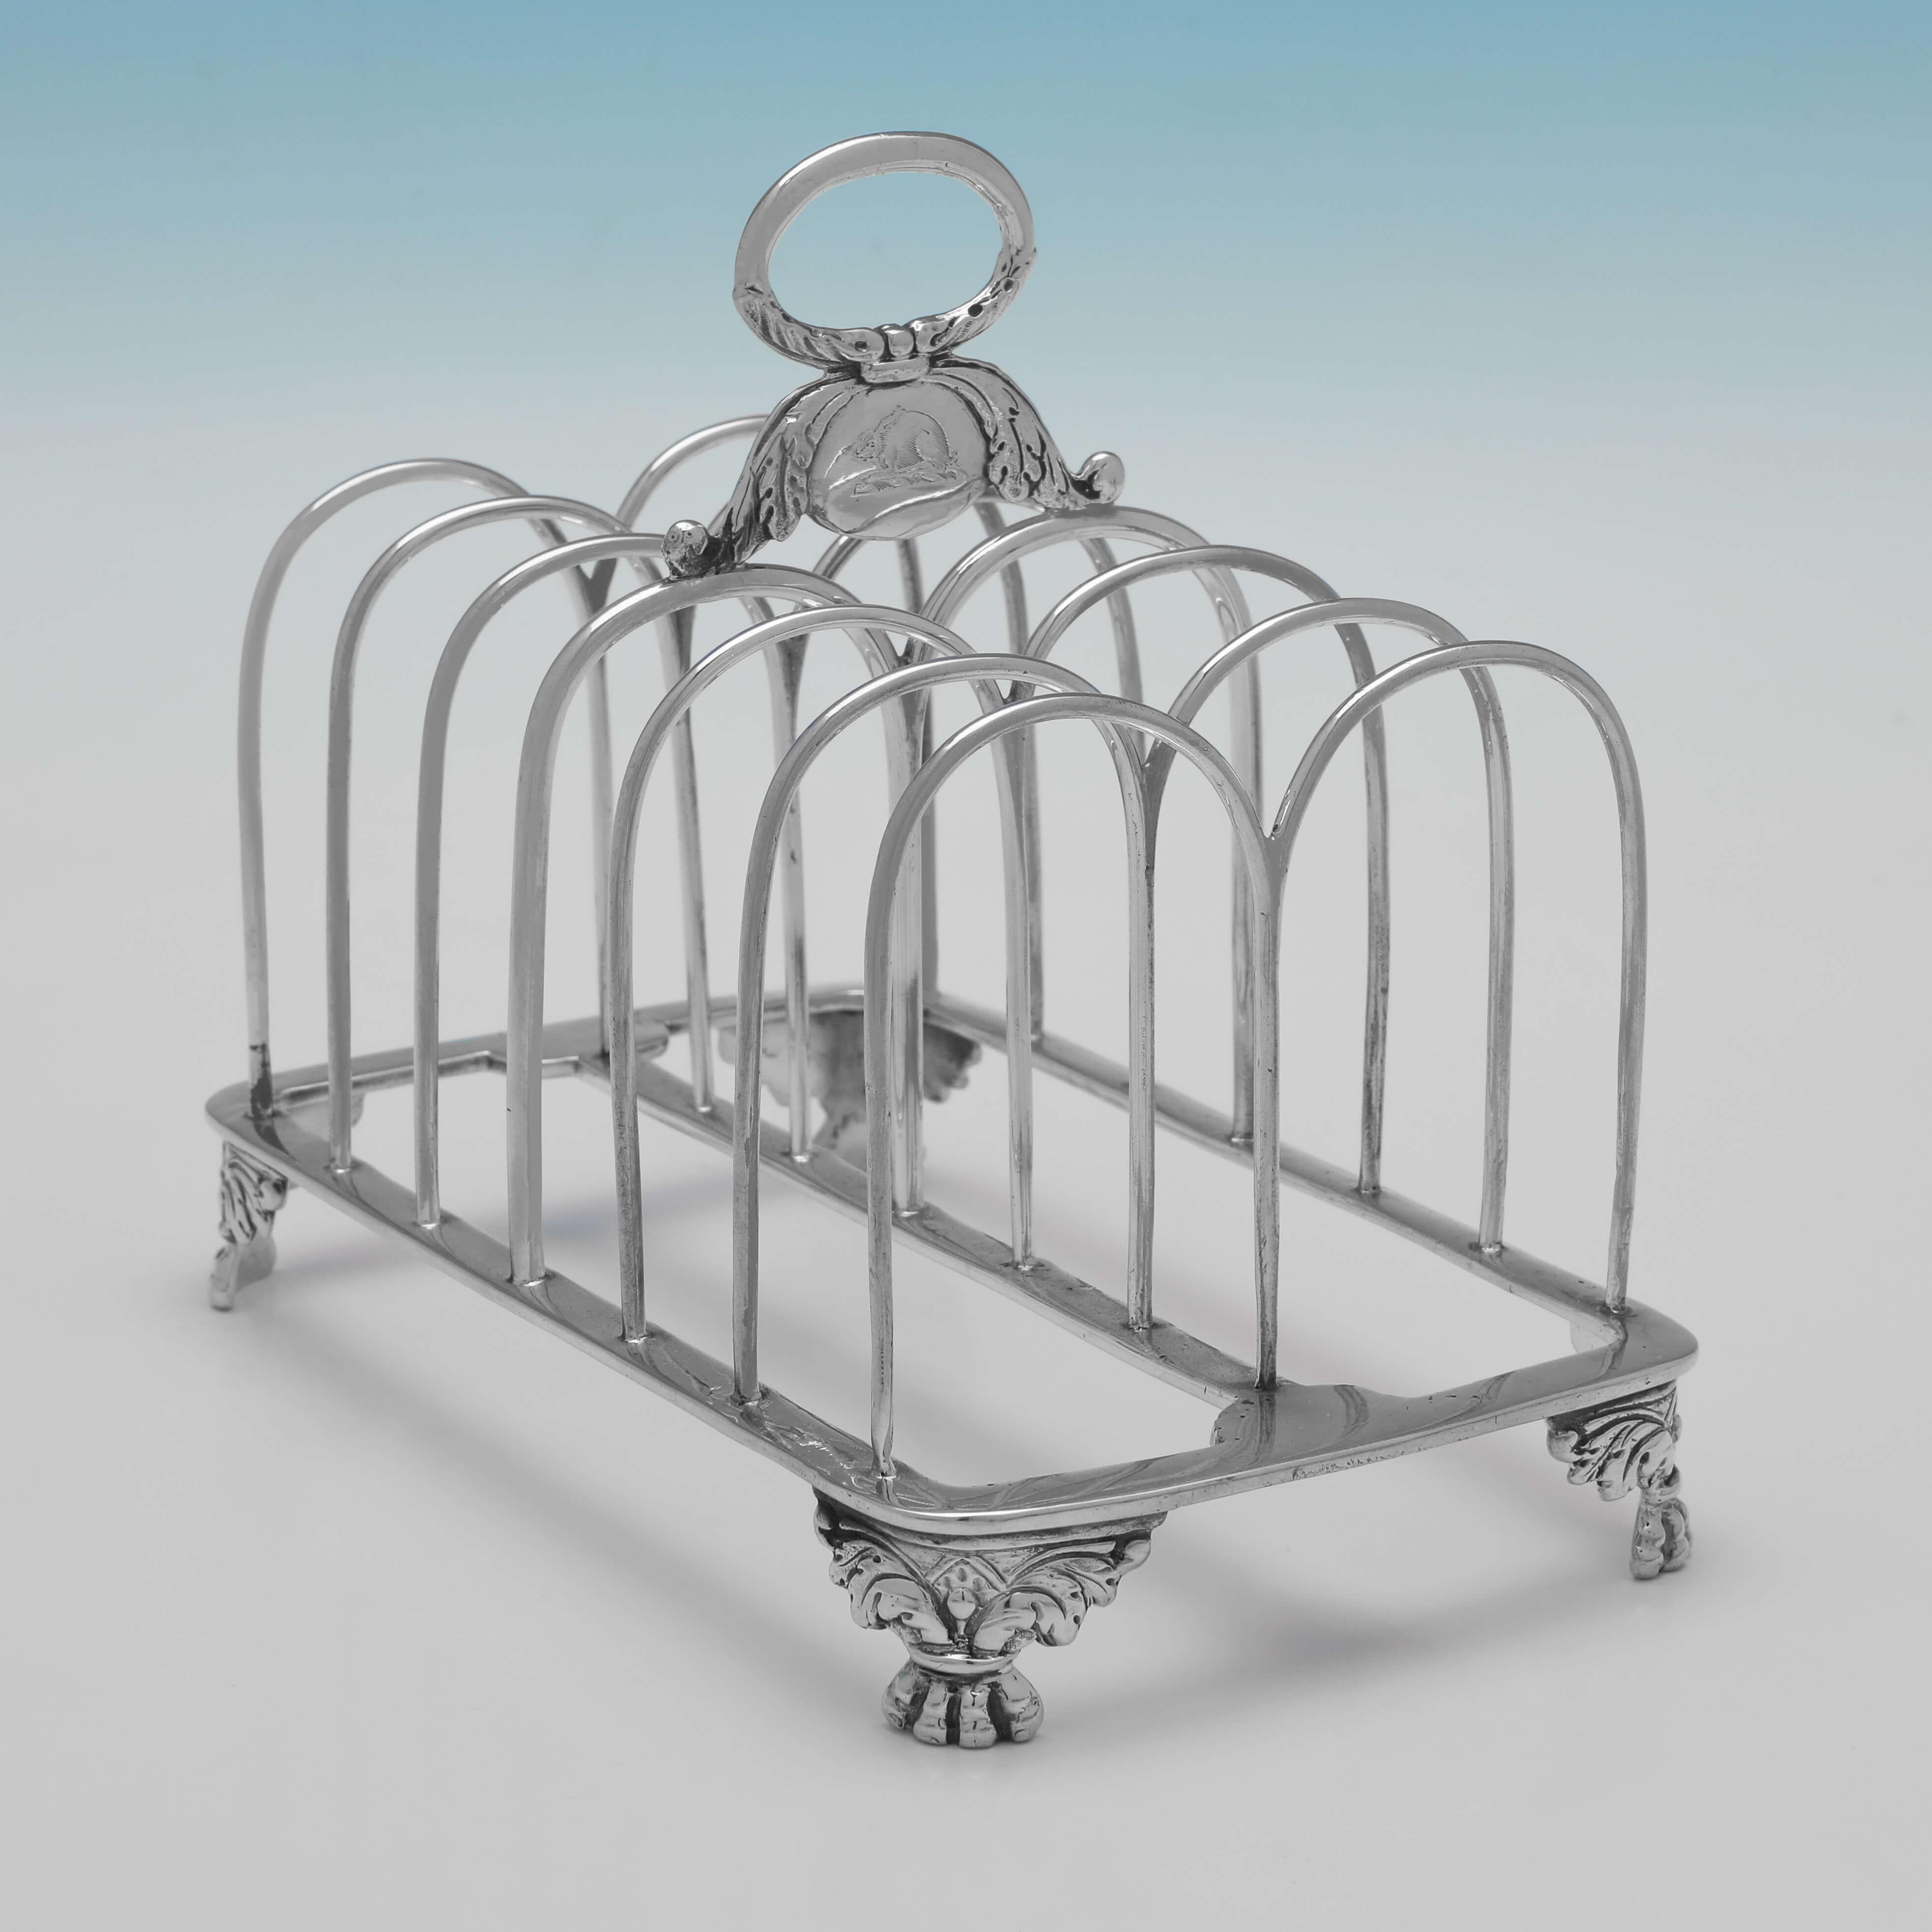 Hallmarked in London in 1823 by Samuel Whitford II, this stunning and rare pair of George IV period, Antique sterling silver toast racks, feature late Regency influenced decoration to the feet and handles, engraved crests of a hare to each handle,